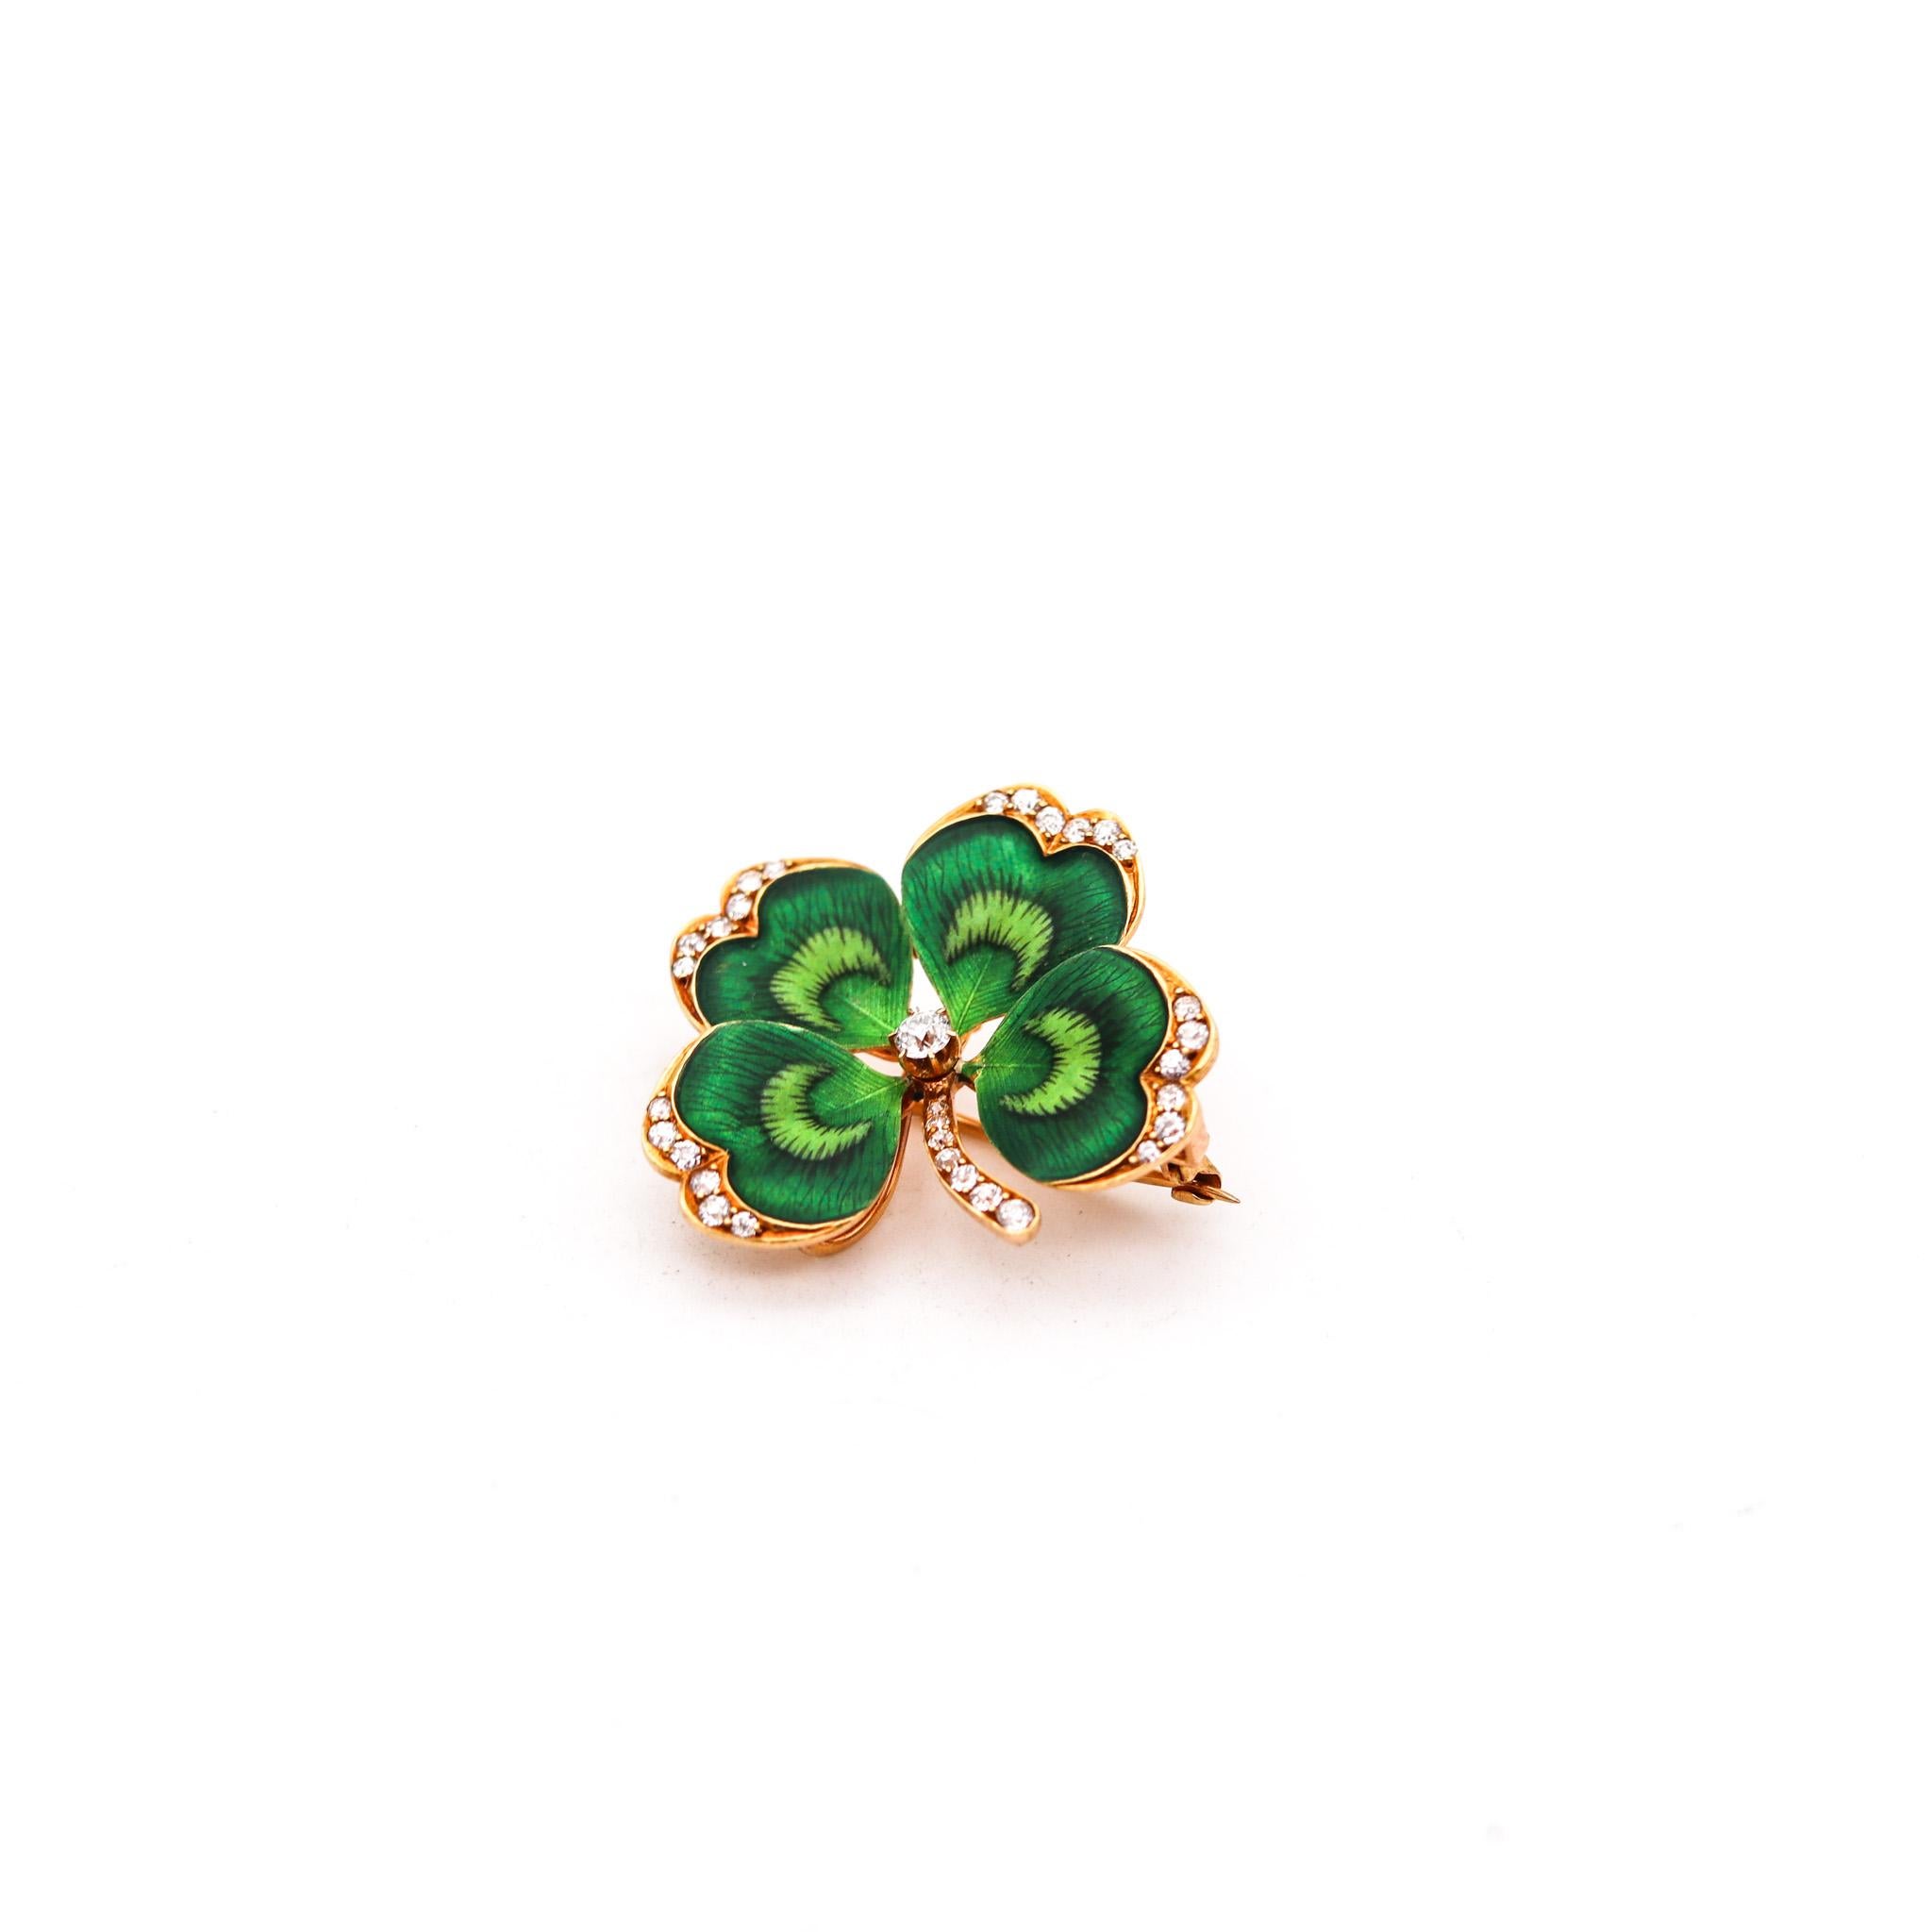 Edwardian enamelled four-leaf Clover convertible brooch.

An extremely beautiful piece, created in America during the Edwardian and the Art Nouveau periods, back in the 1900-1910. This outstanding multi purpose pendant-brooch has been carefully